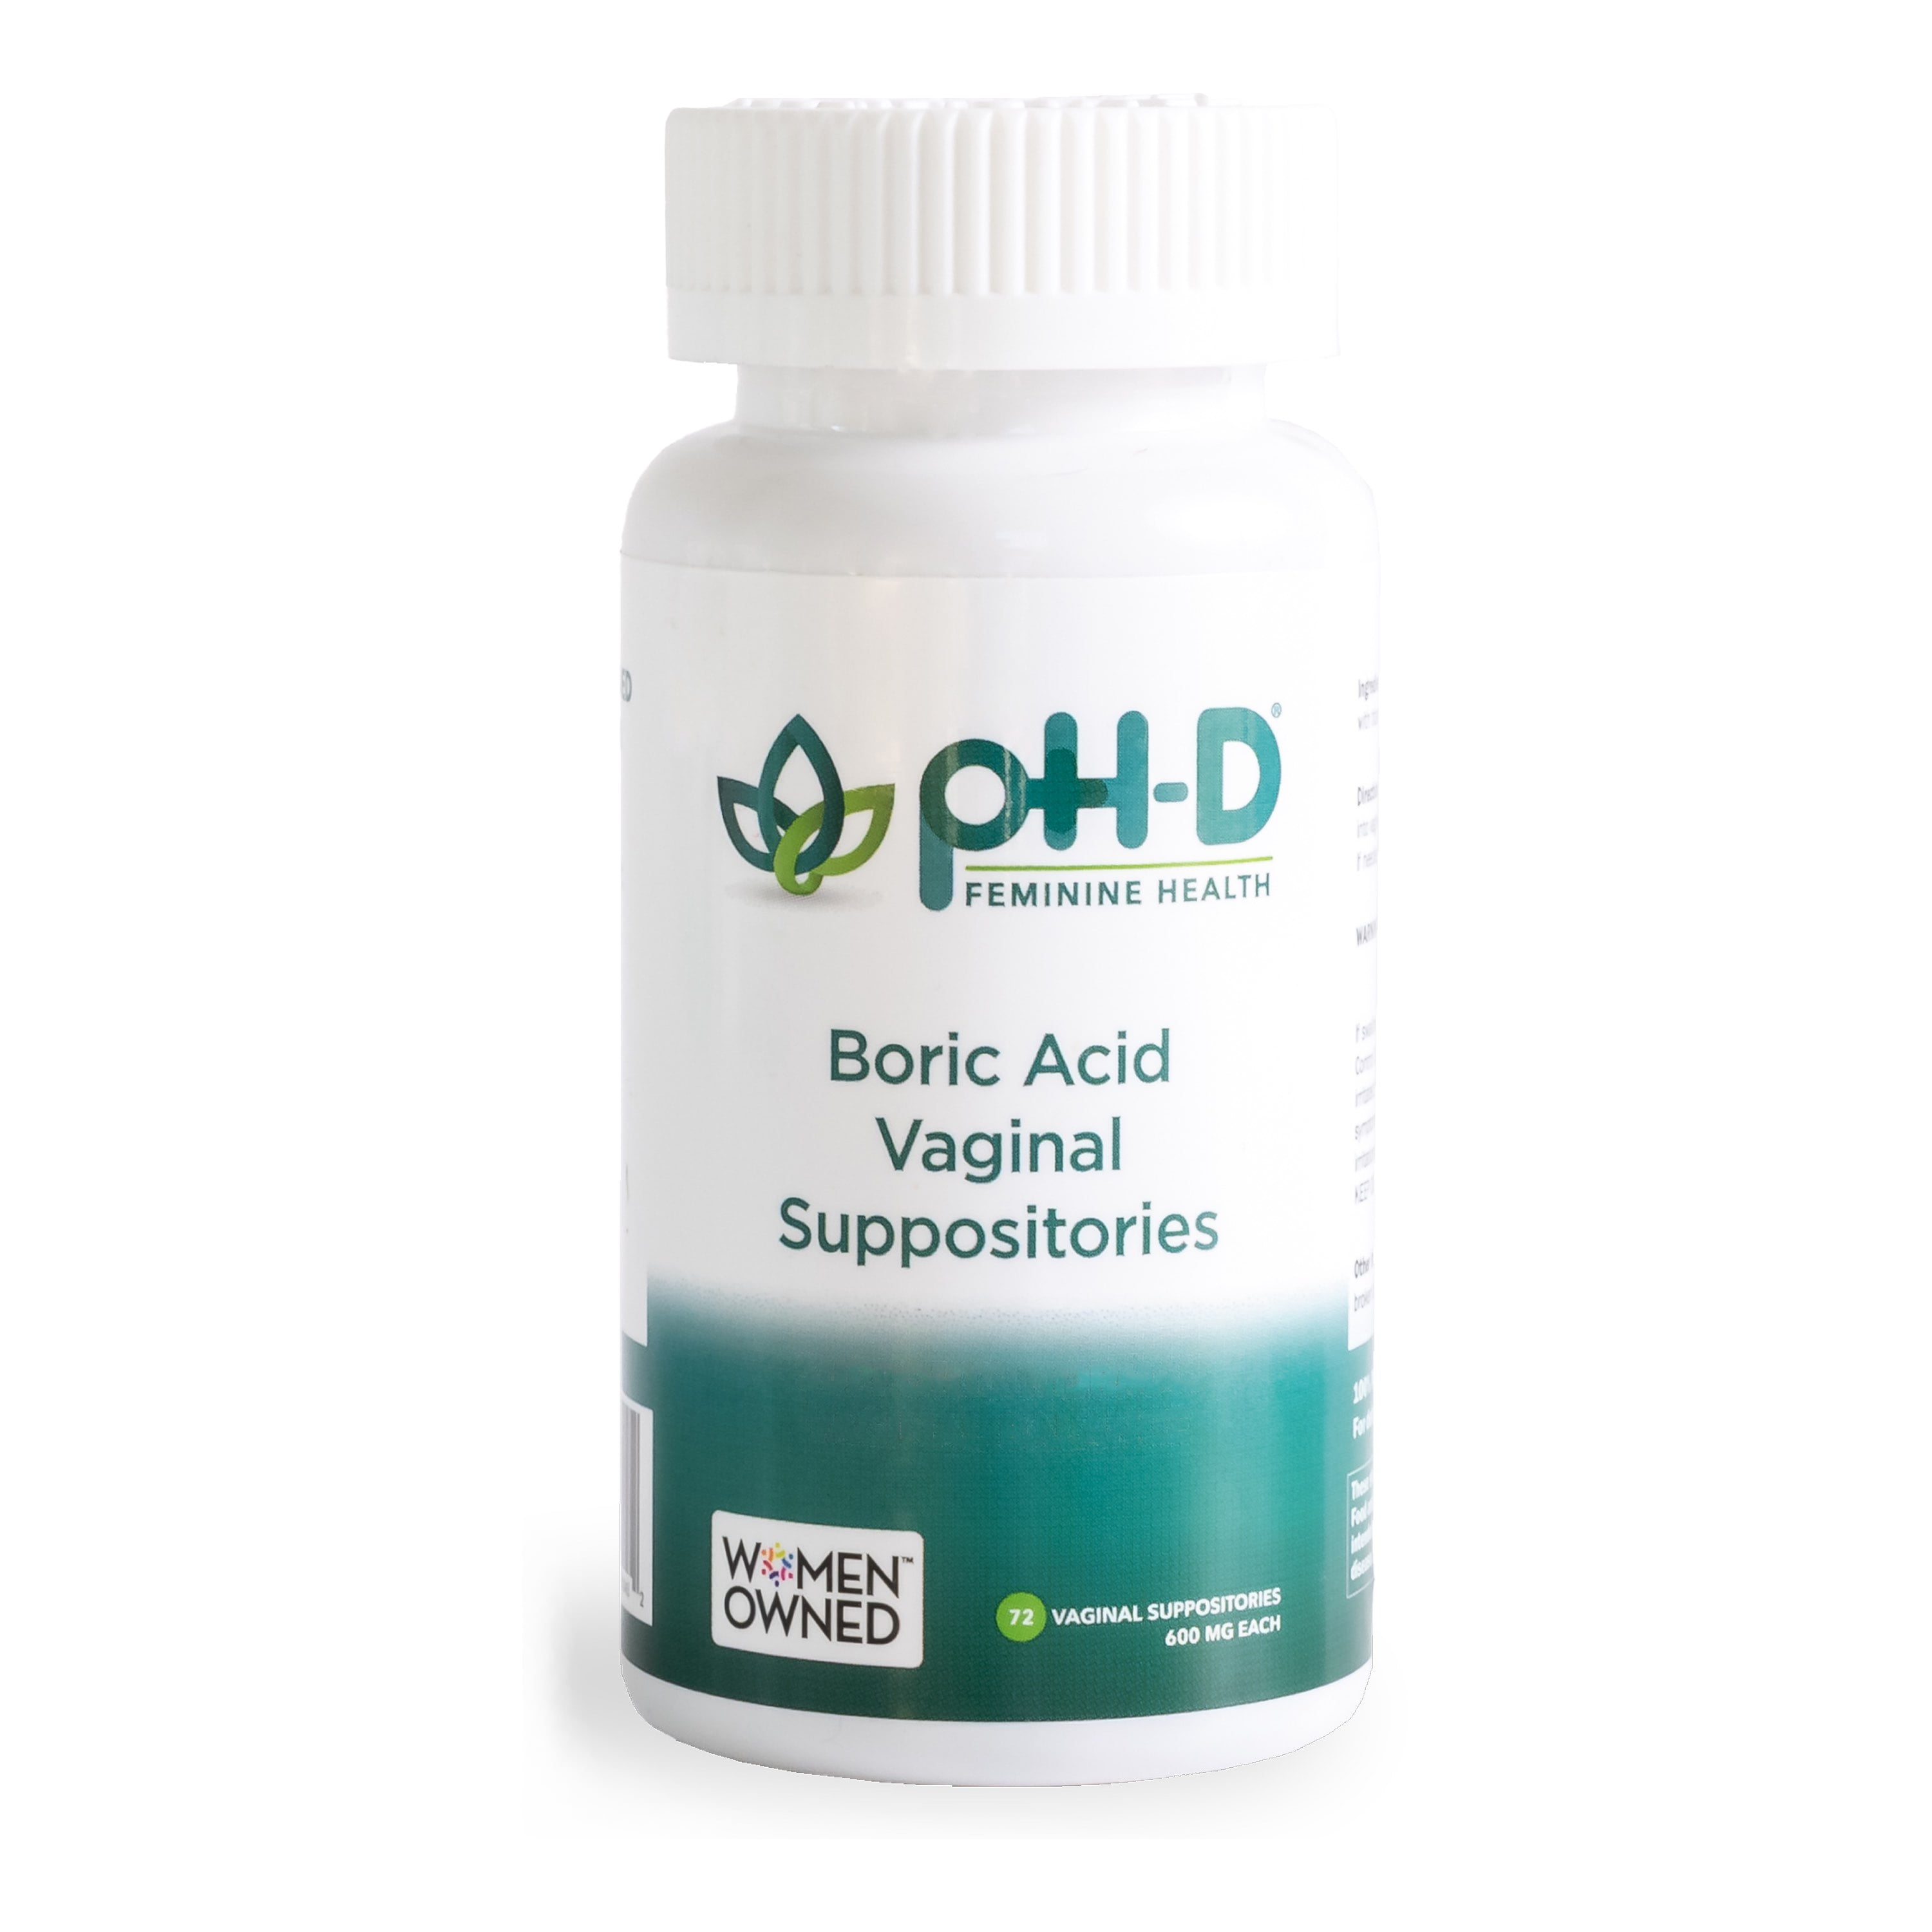 where to buy phd boric acid suppositories